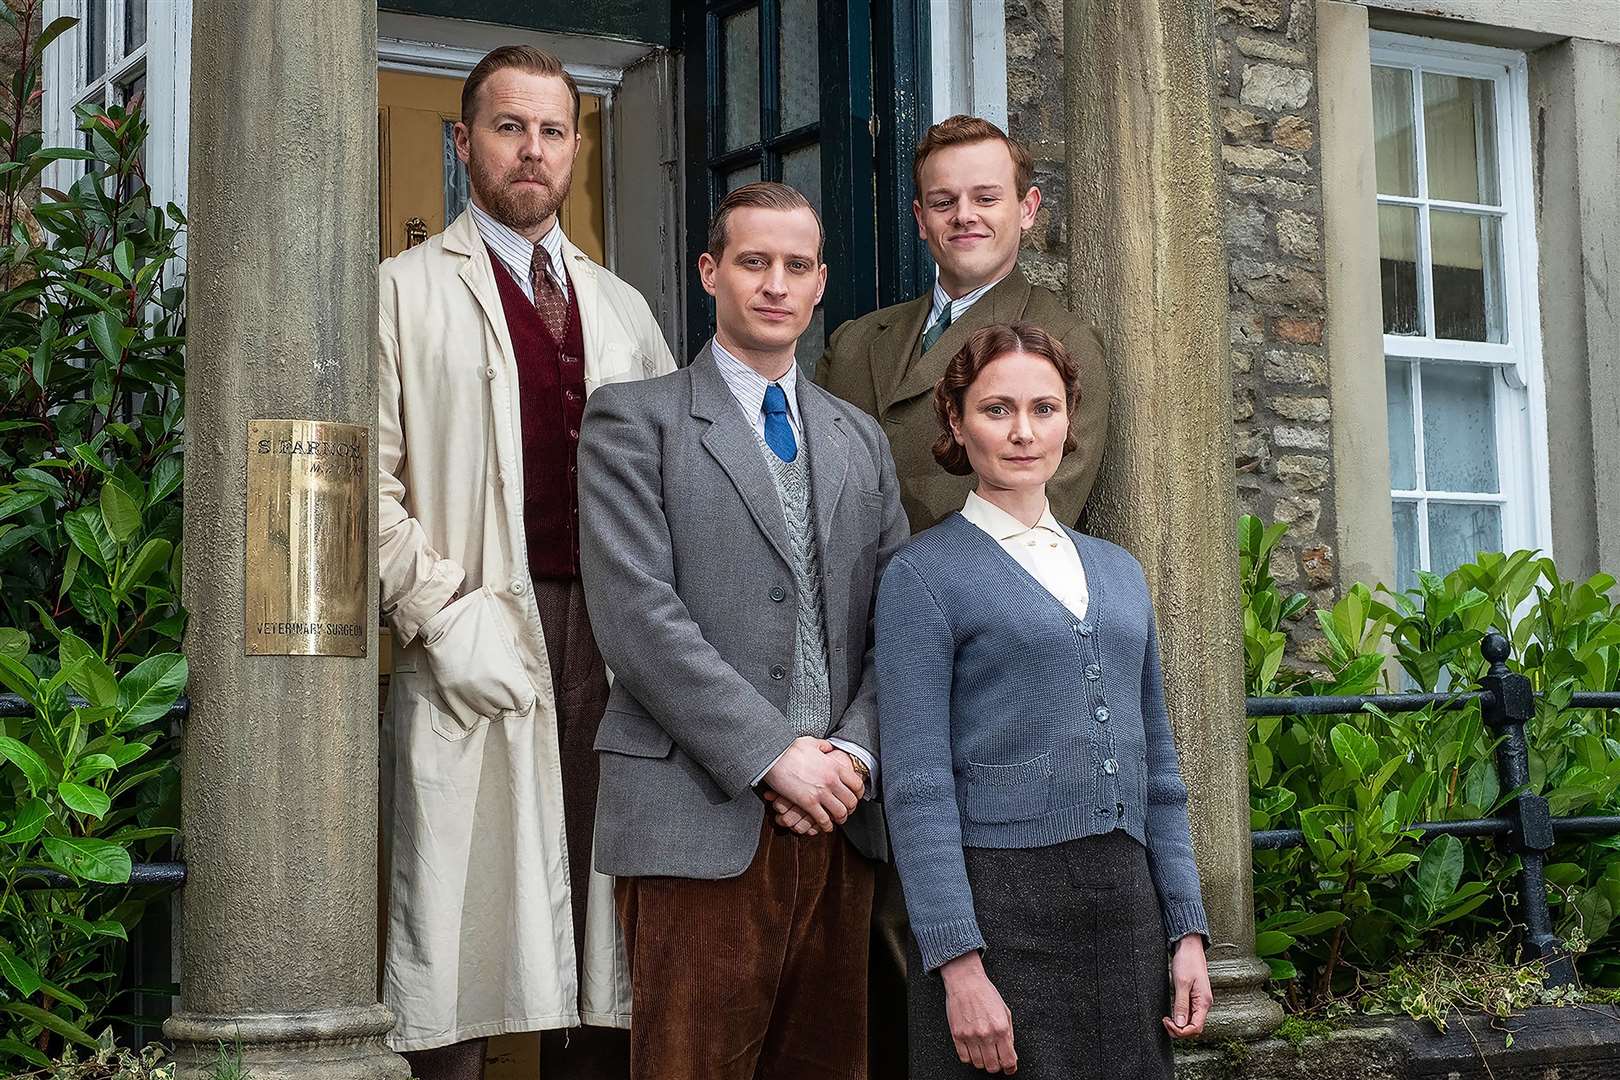 Nicholas Ralph (middle left) with Samuel West (top left) as Siegfried, Callum Woodhouse as Tristan and Anna Madeley as their housekeeper Mrs Hall.